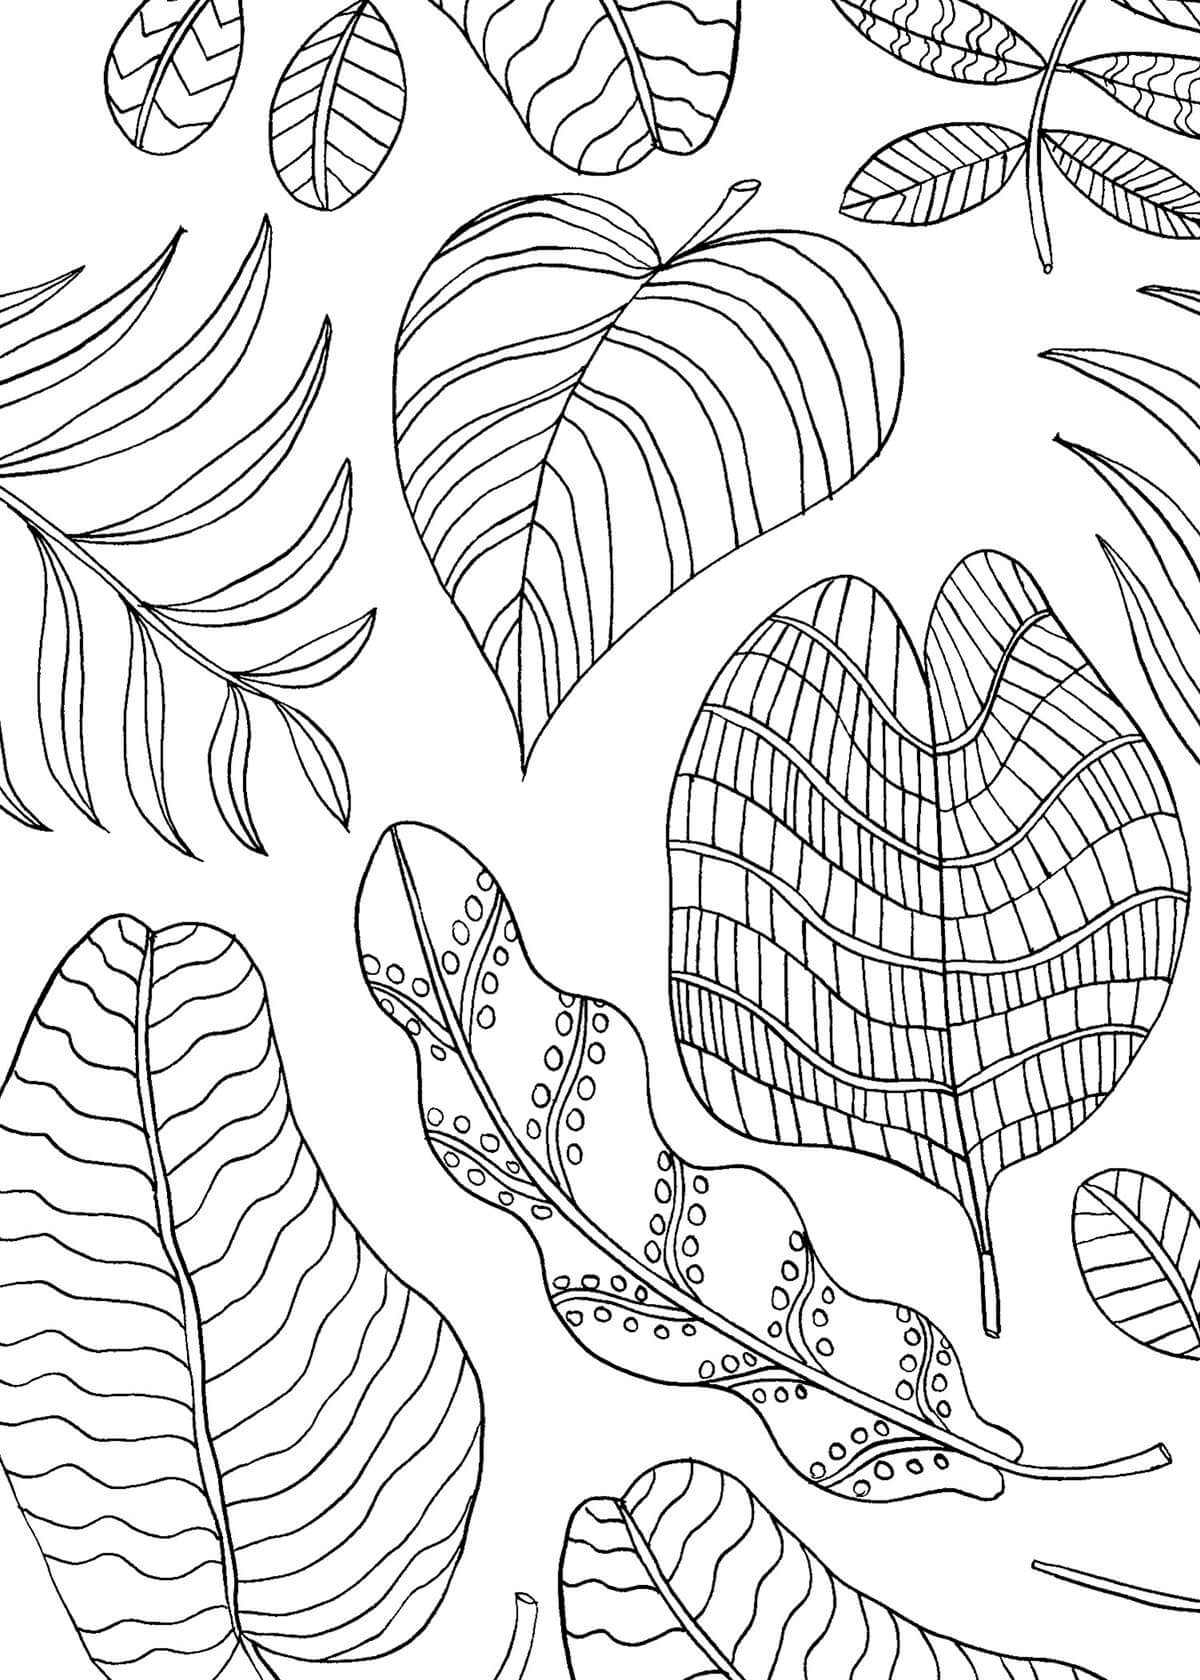 Nature Leaf Mindfulness For Kids Coloring Page